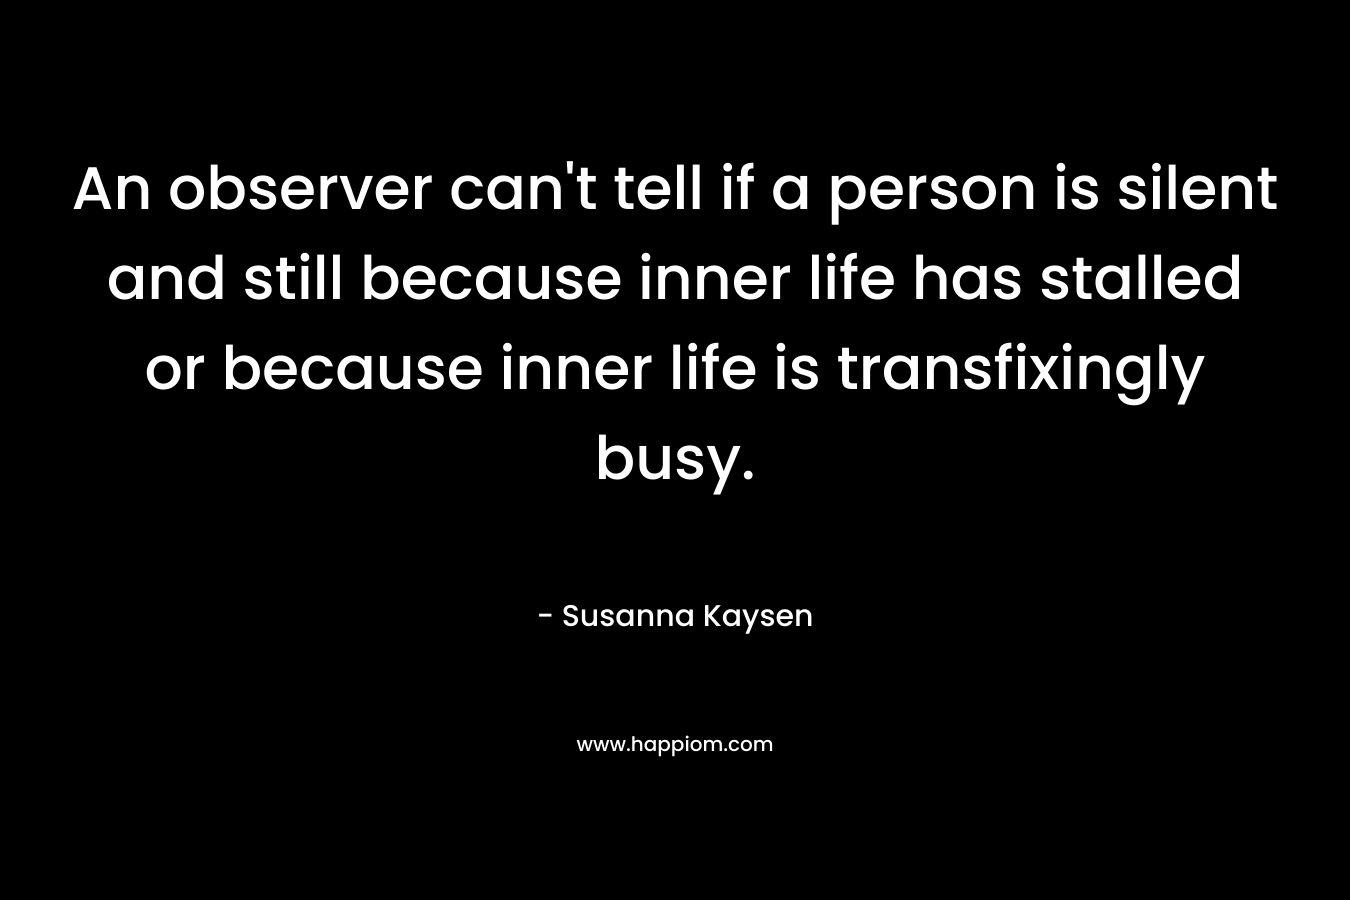 An observer can’t tell if a person is silent and still because inner life has stalled or because inner life is transfixingly busy. – Susanna Kaysen